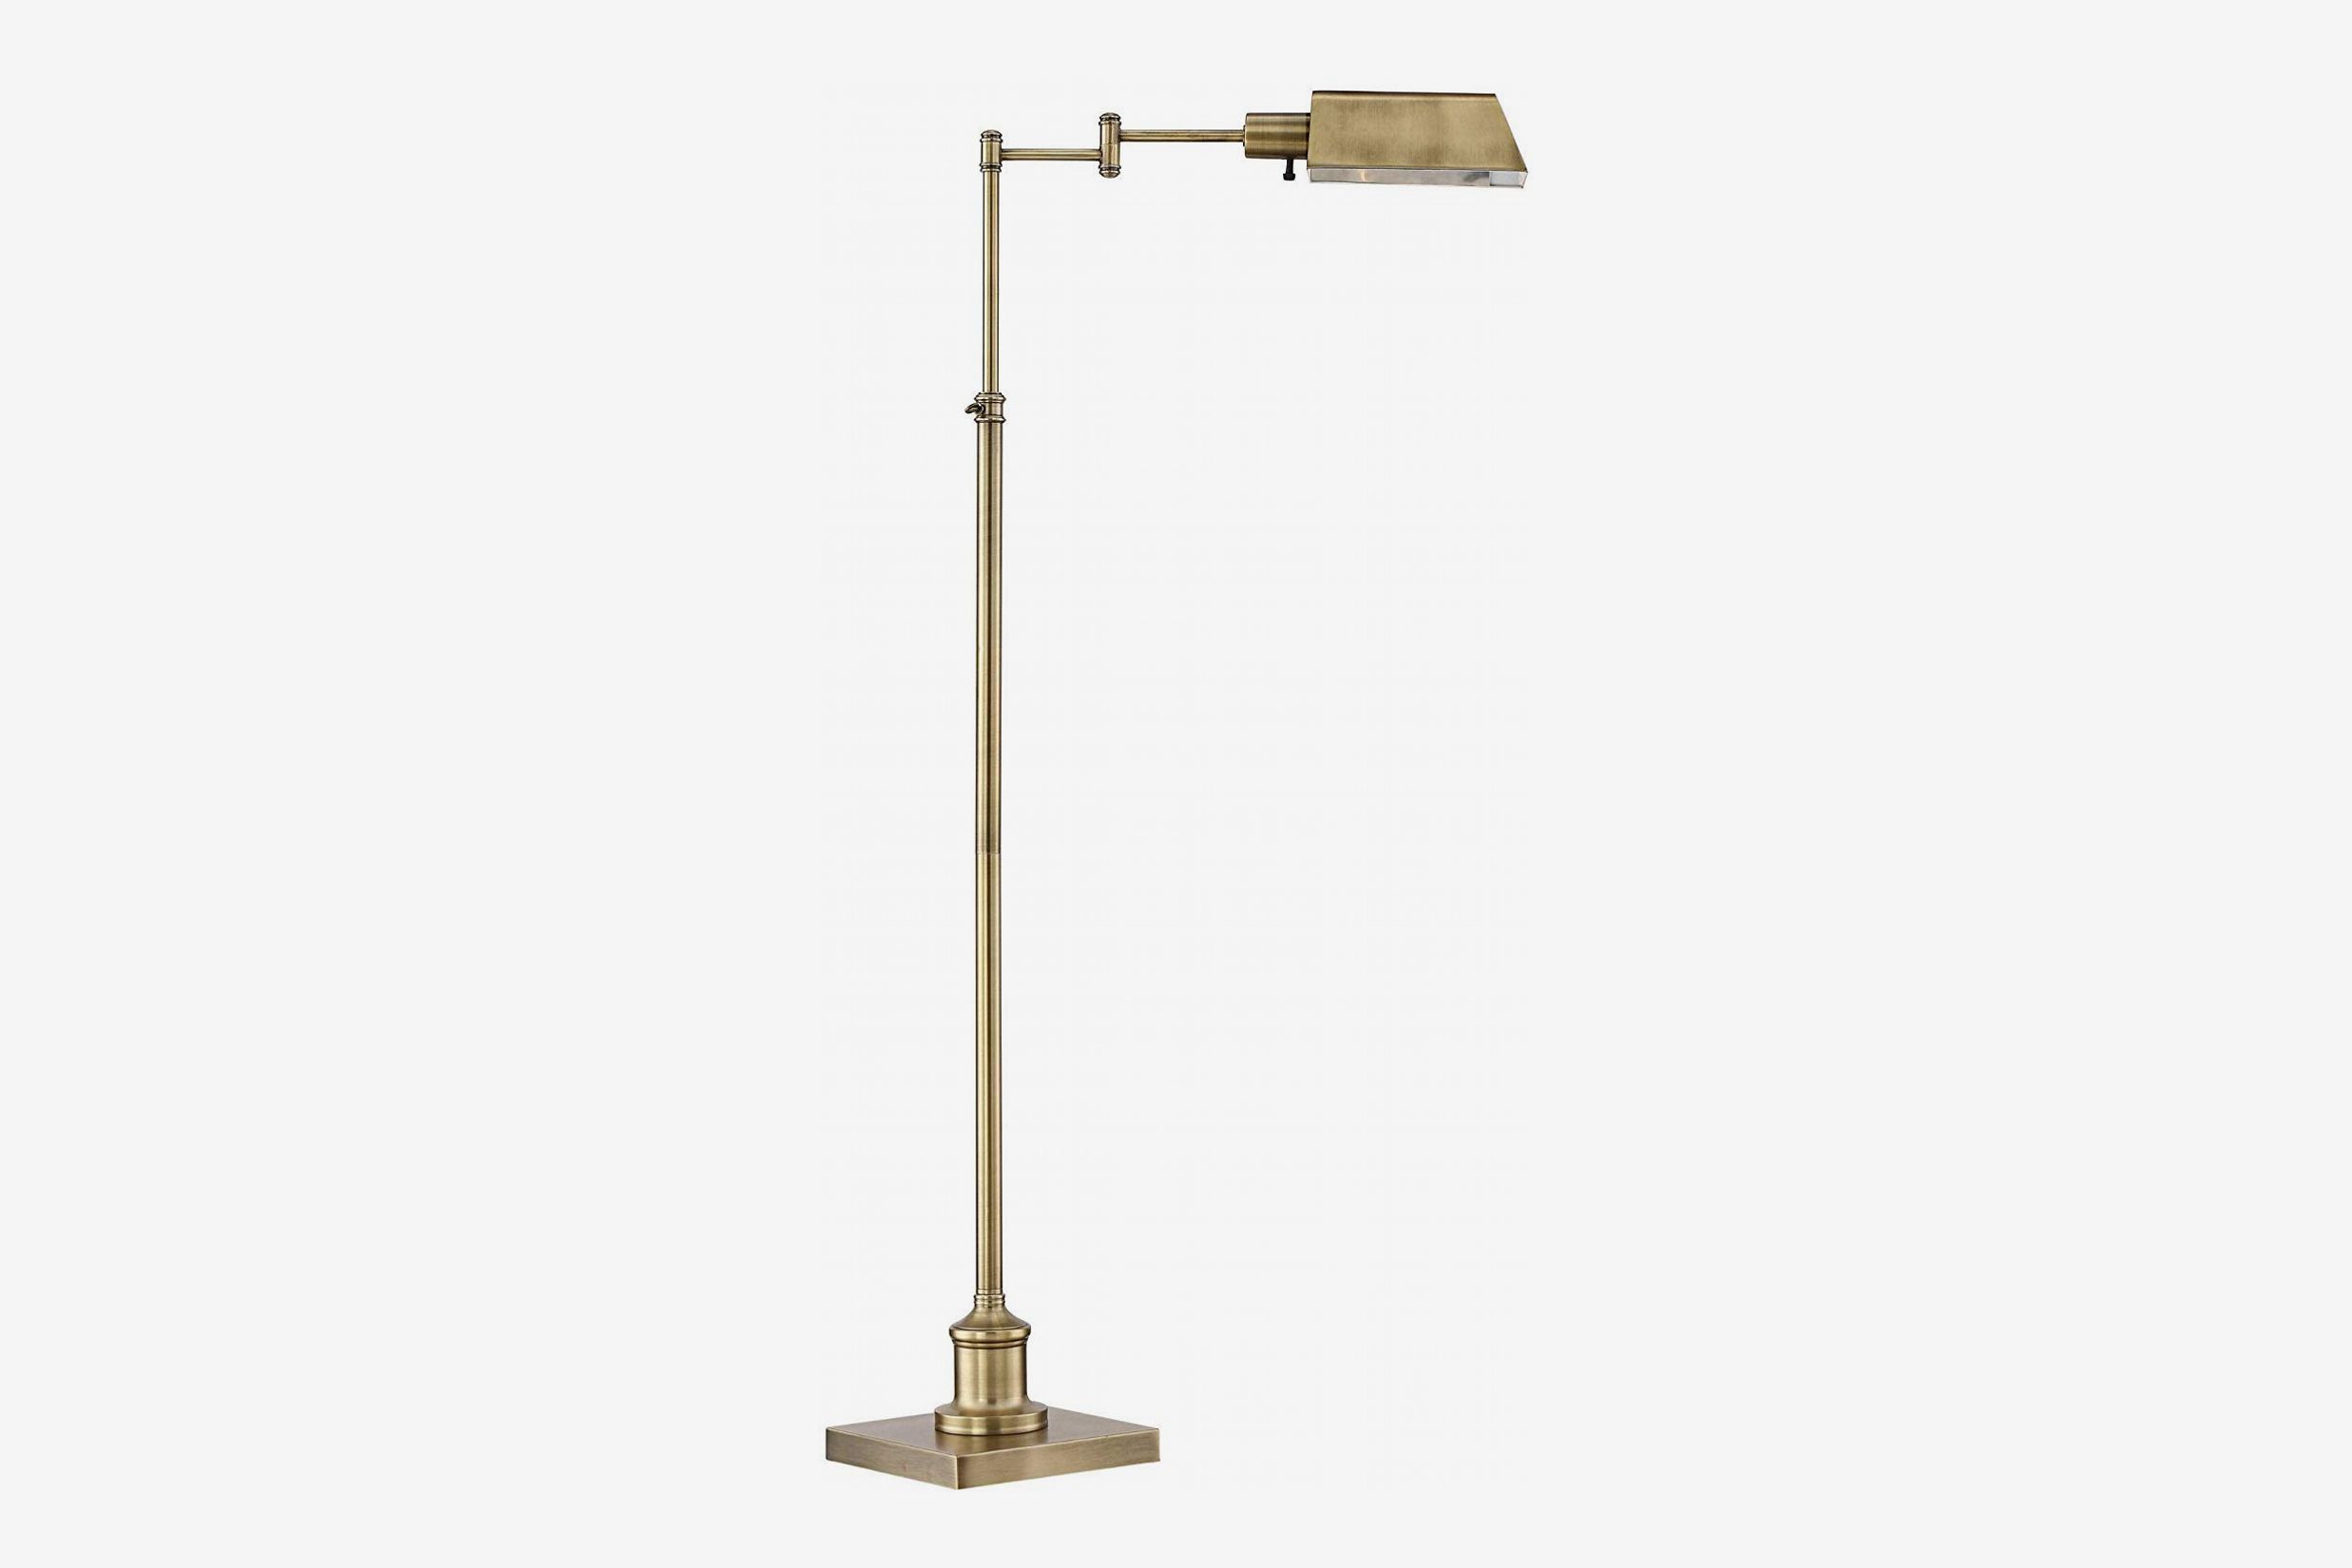 32 Best Floor Lamps 2020 The Strategist, Small Floor Lamps For Reading